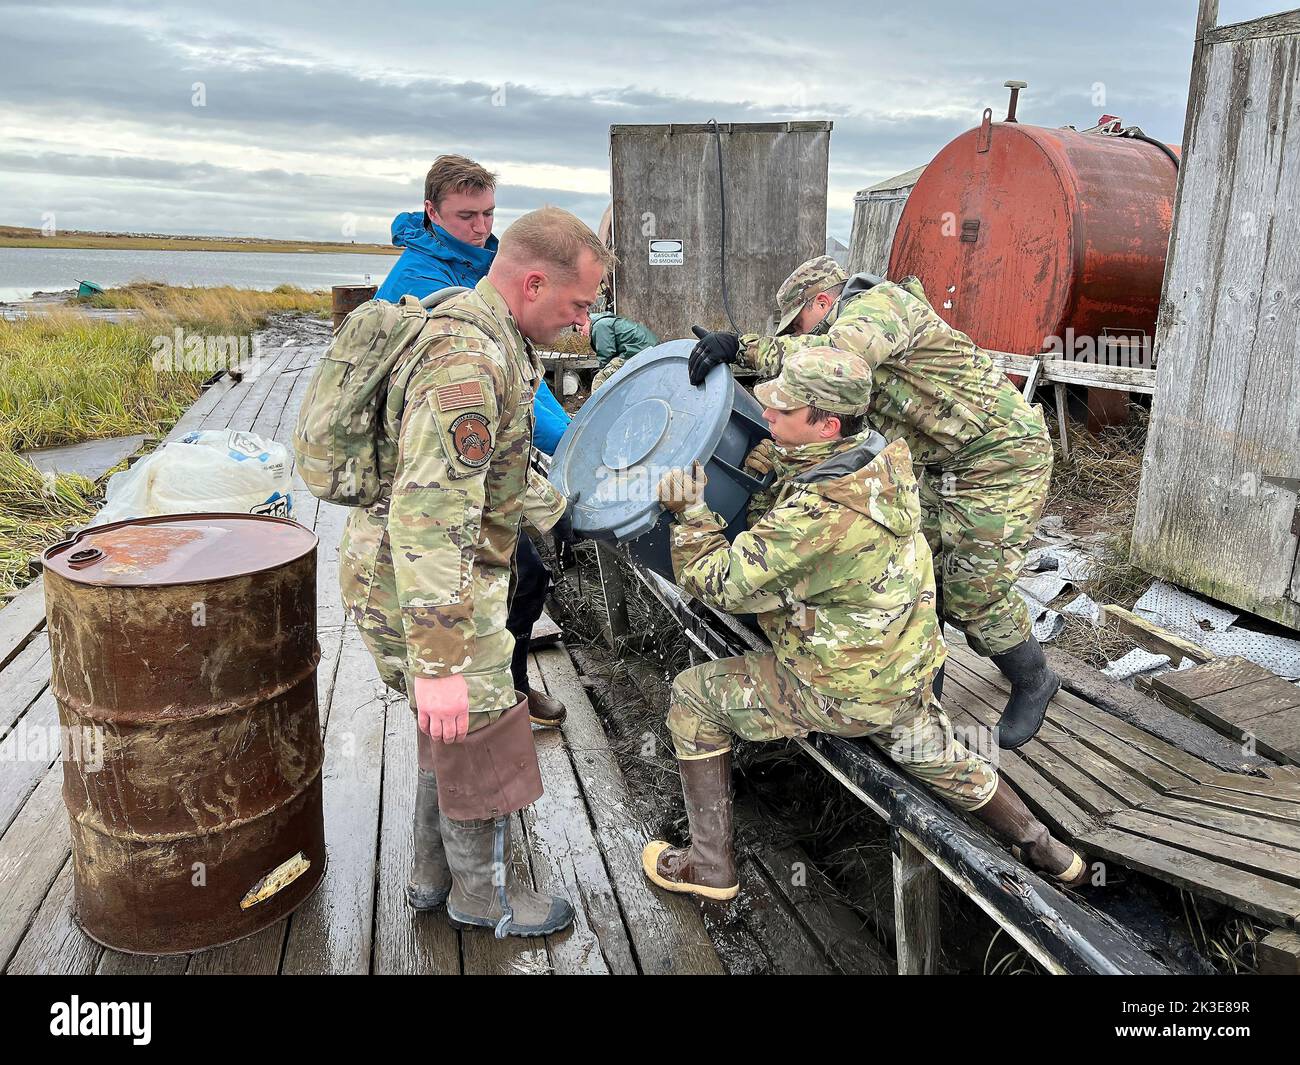 Newtok, United States. 22nd Sep, 2022. U.S. soldiers with the Alaska National Guard assist local residents with clean up of damaged property during Operation Merbok Response, September 22, 2022 in Newtok, Alaska. The remote coastal villages suffered damage from the remnants of Typhoon Merbok that caused flooding across more than 1,000 miles of Alaskan coastline. Credit: 1st Lt. Balinda O'Neal/US Army/Alamy Live News Stock Photo